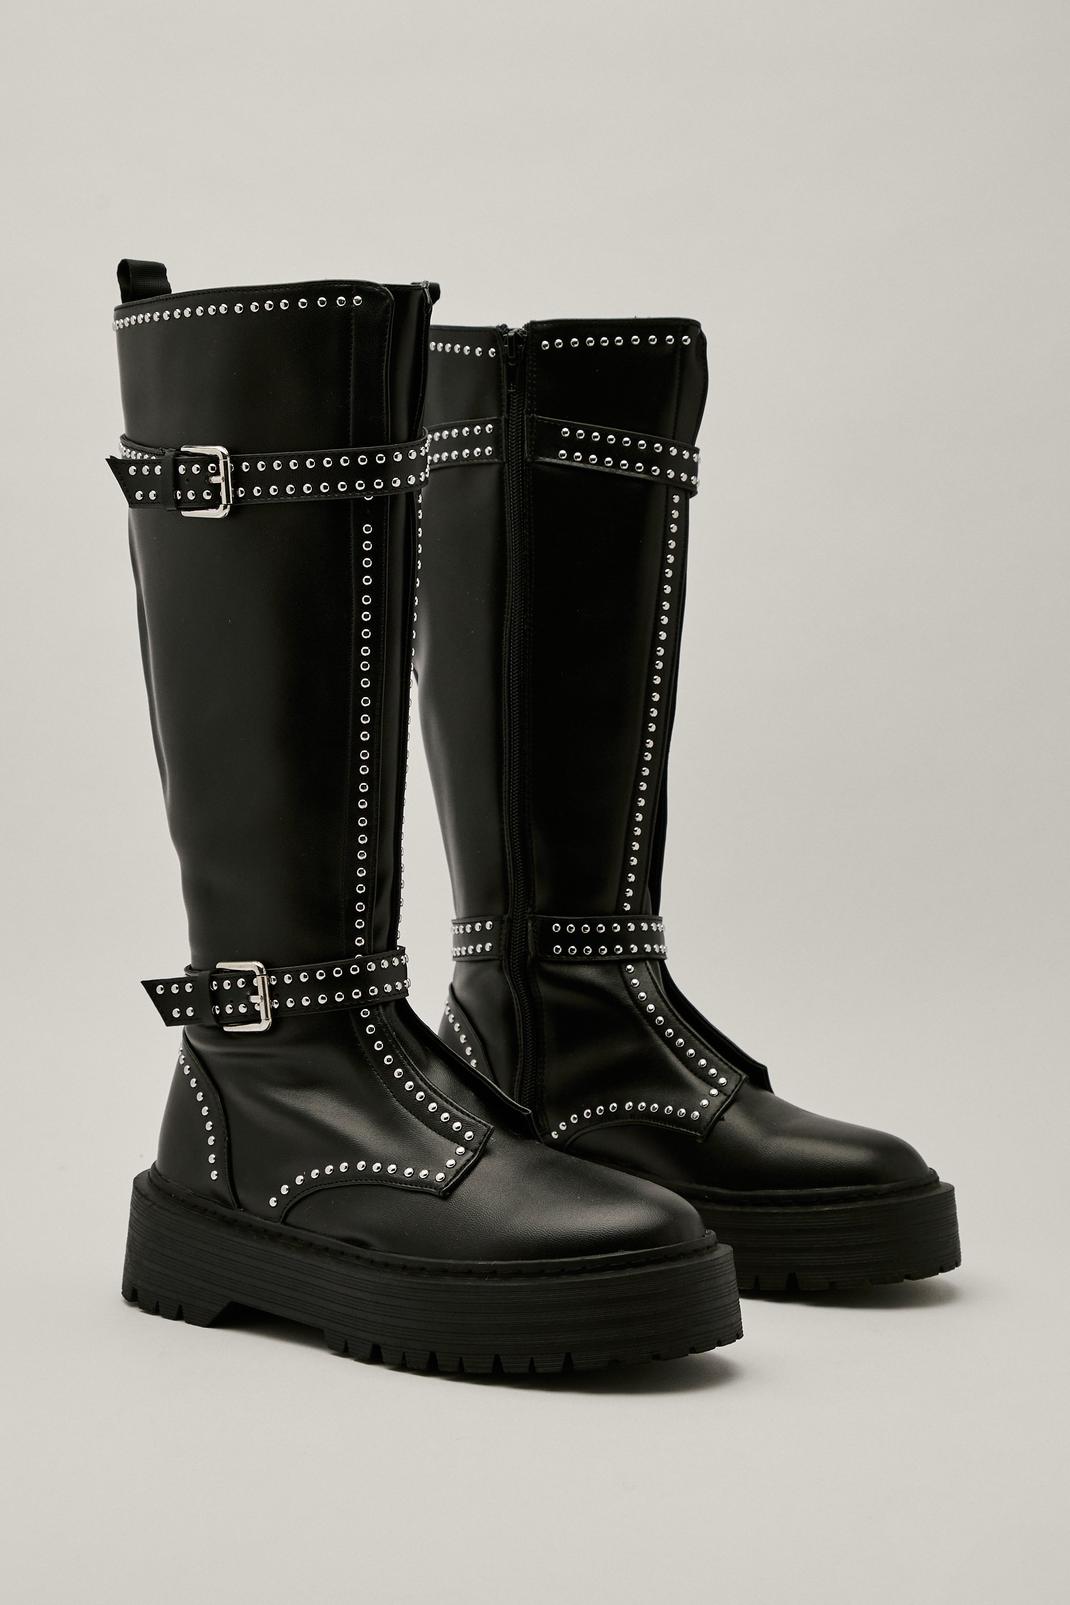 Black Faux Leather Double Buckle Studded Calf High Boots image number 1